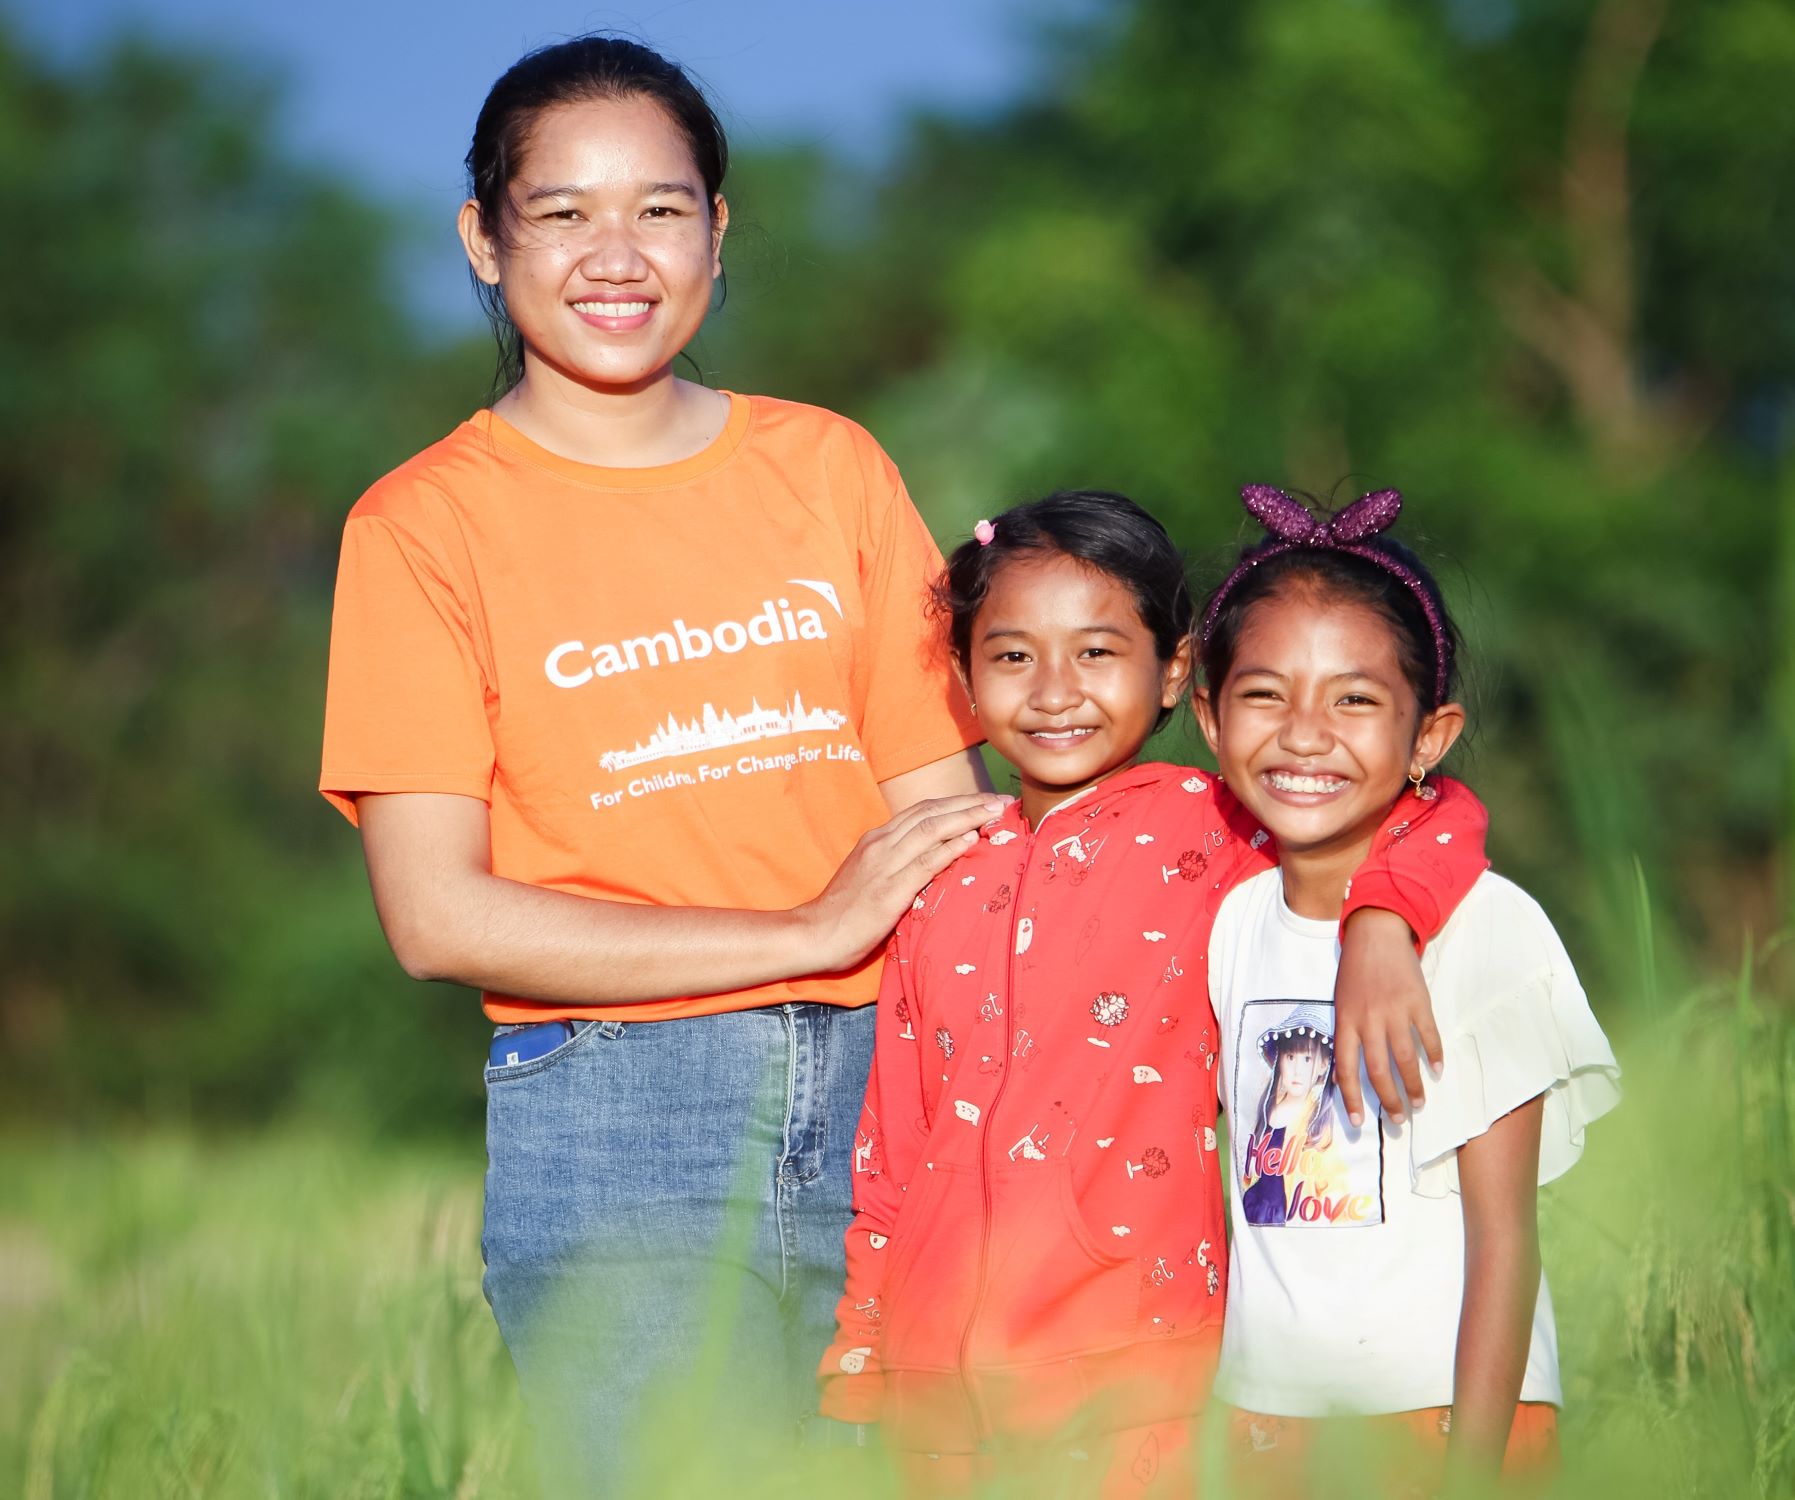 Lady with World Vision Cambodia T-shirt and two children smiling